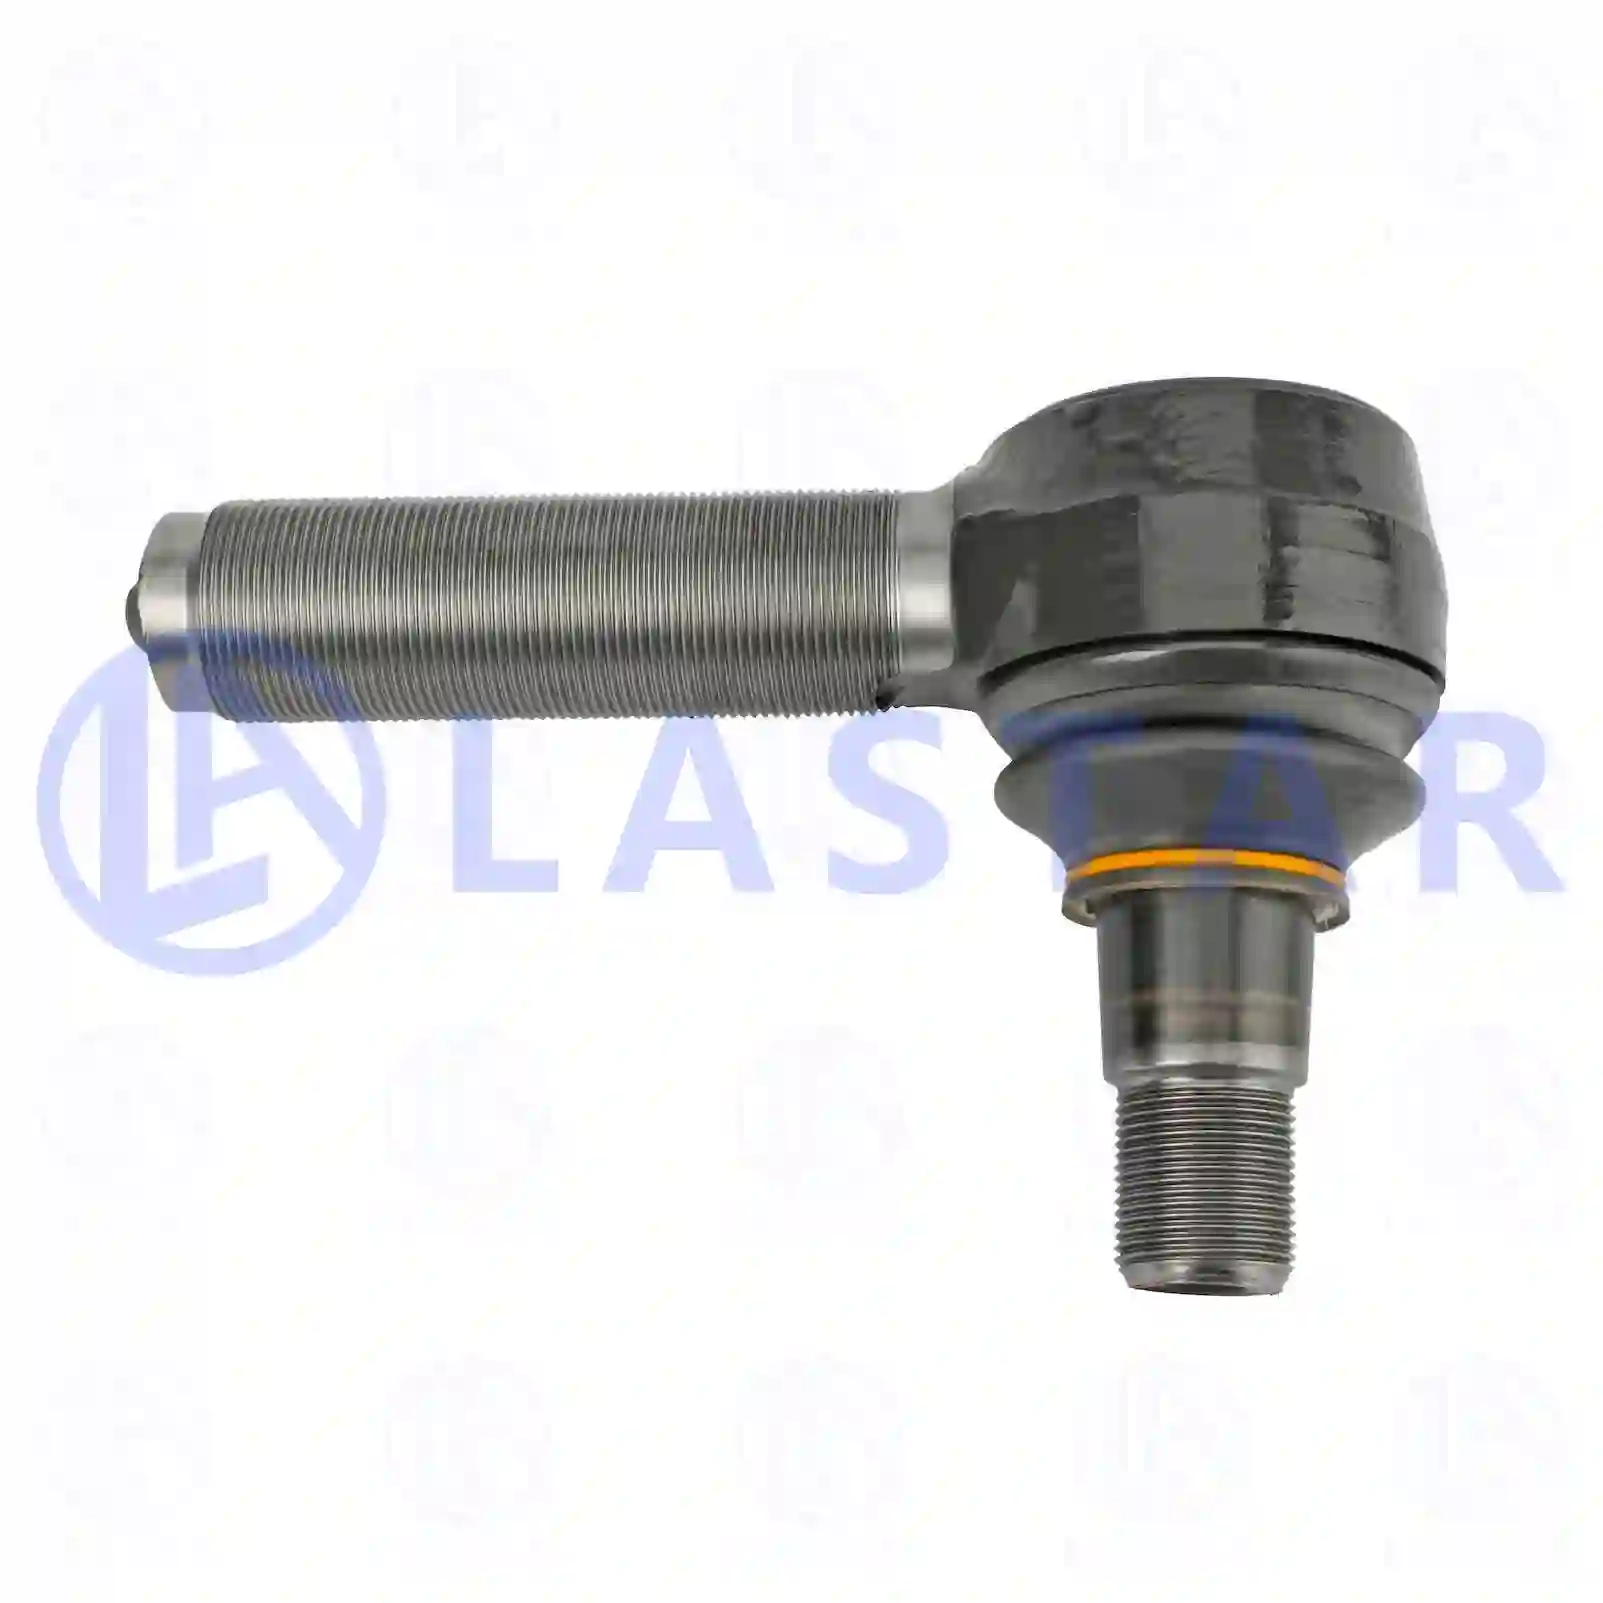 Drag Link Ball joint, right hand thread, la no: 77705109 ,  oem no:0014607248, 5001866165, 5001867774, ZG40405-0008, Lastar Spare Part | Truck Spare Parts, Auotomotive Spare Parts